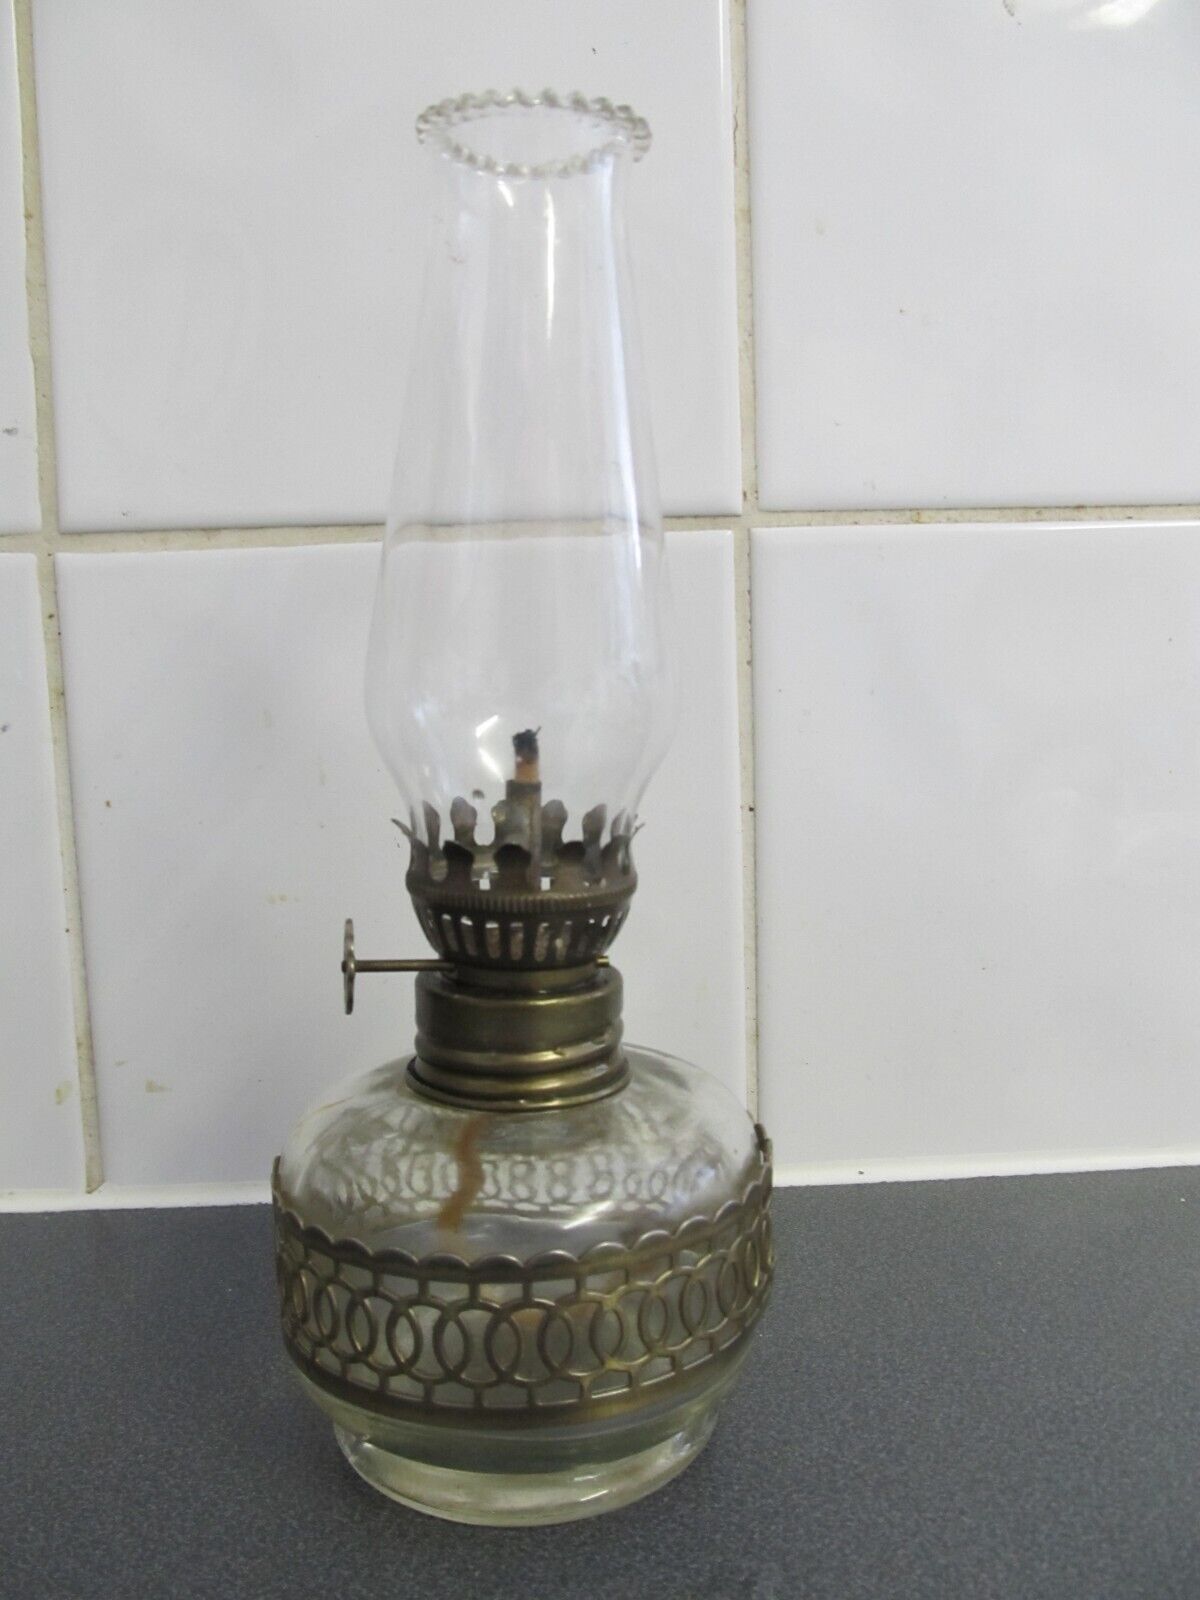 Vintage 8-inch Oil Lamp Lamplight Farms Lovely Condition